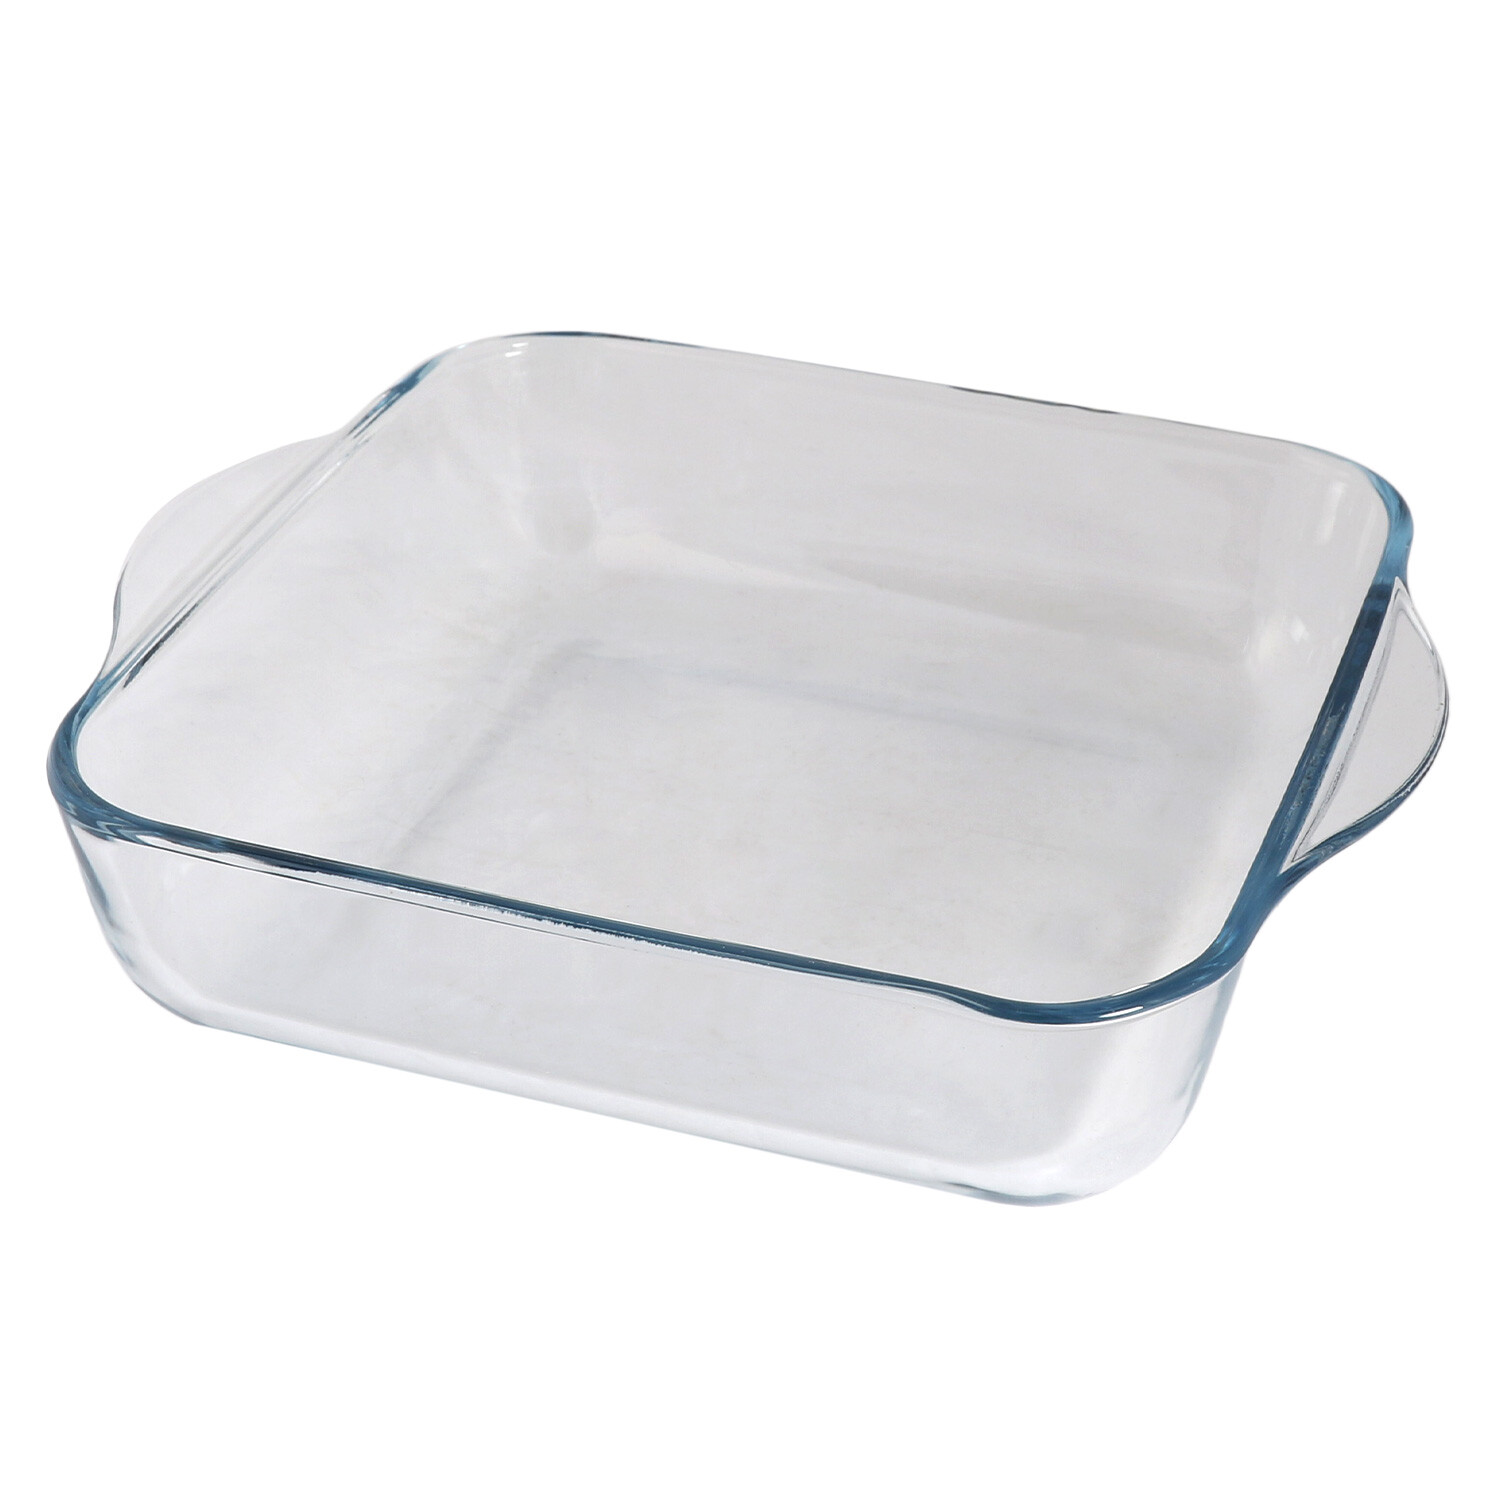 Glass Oven Dish - Clear / Square Image 2